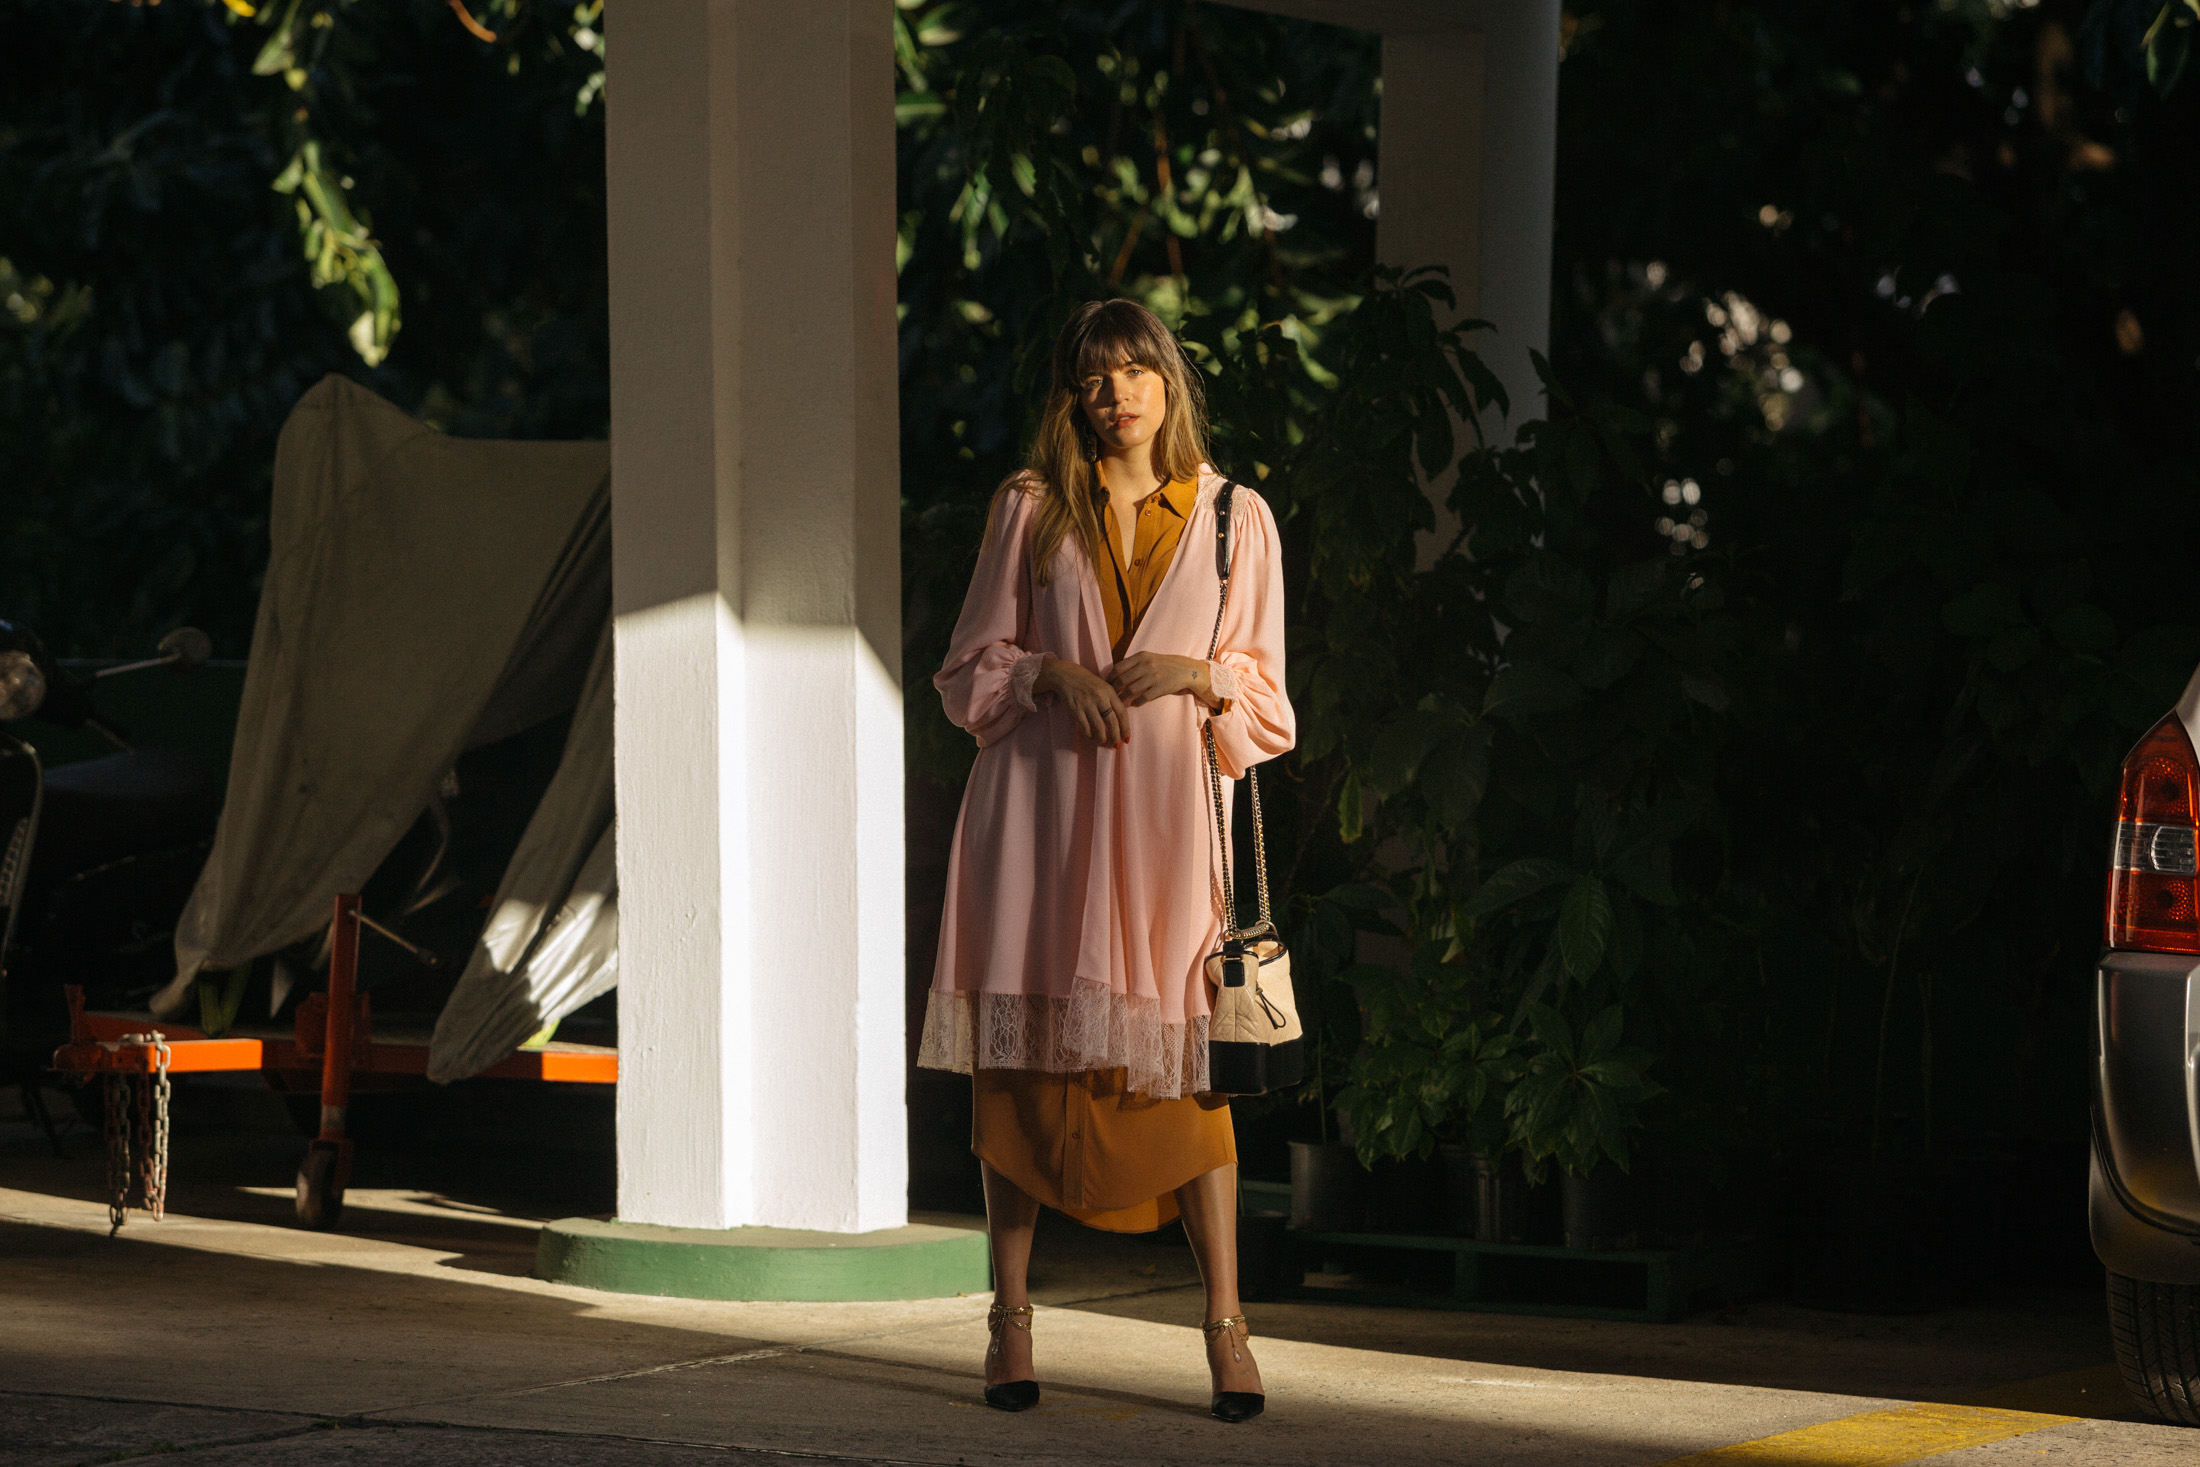 Maristella wears a pink Chanel Spring 2017 hooded robe with rust shirt dress, kitten heels and the Chanel Gabrielle bag